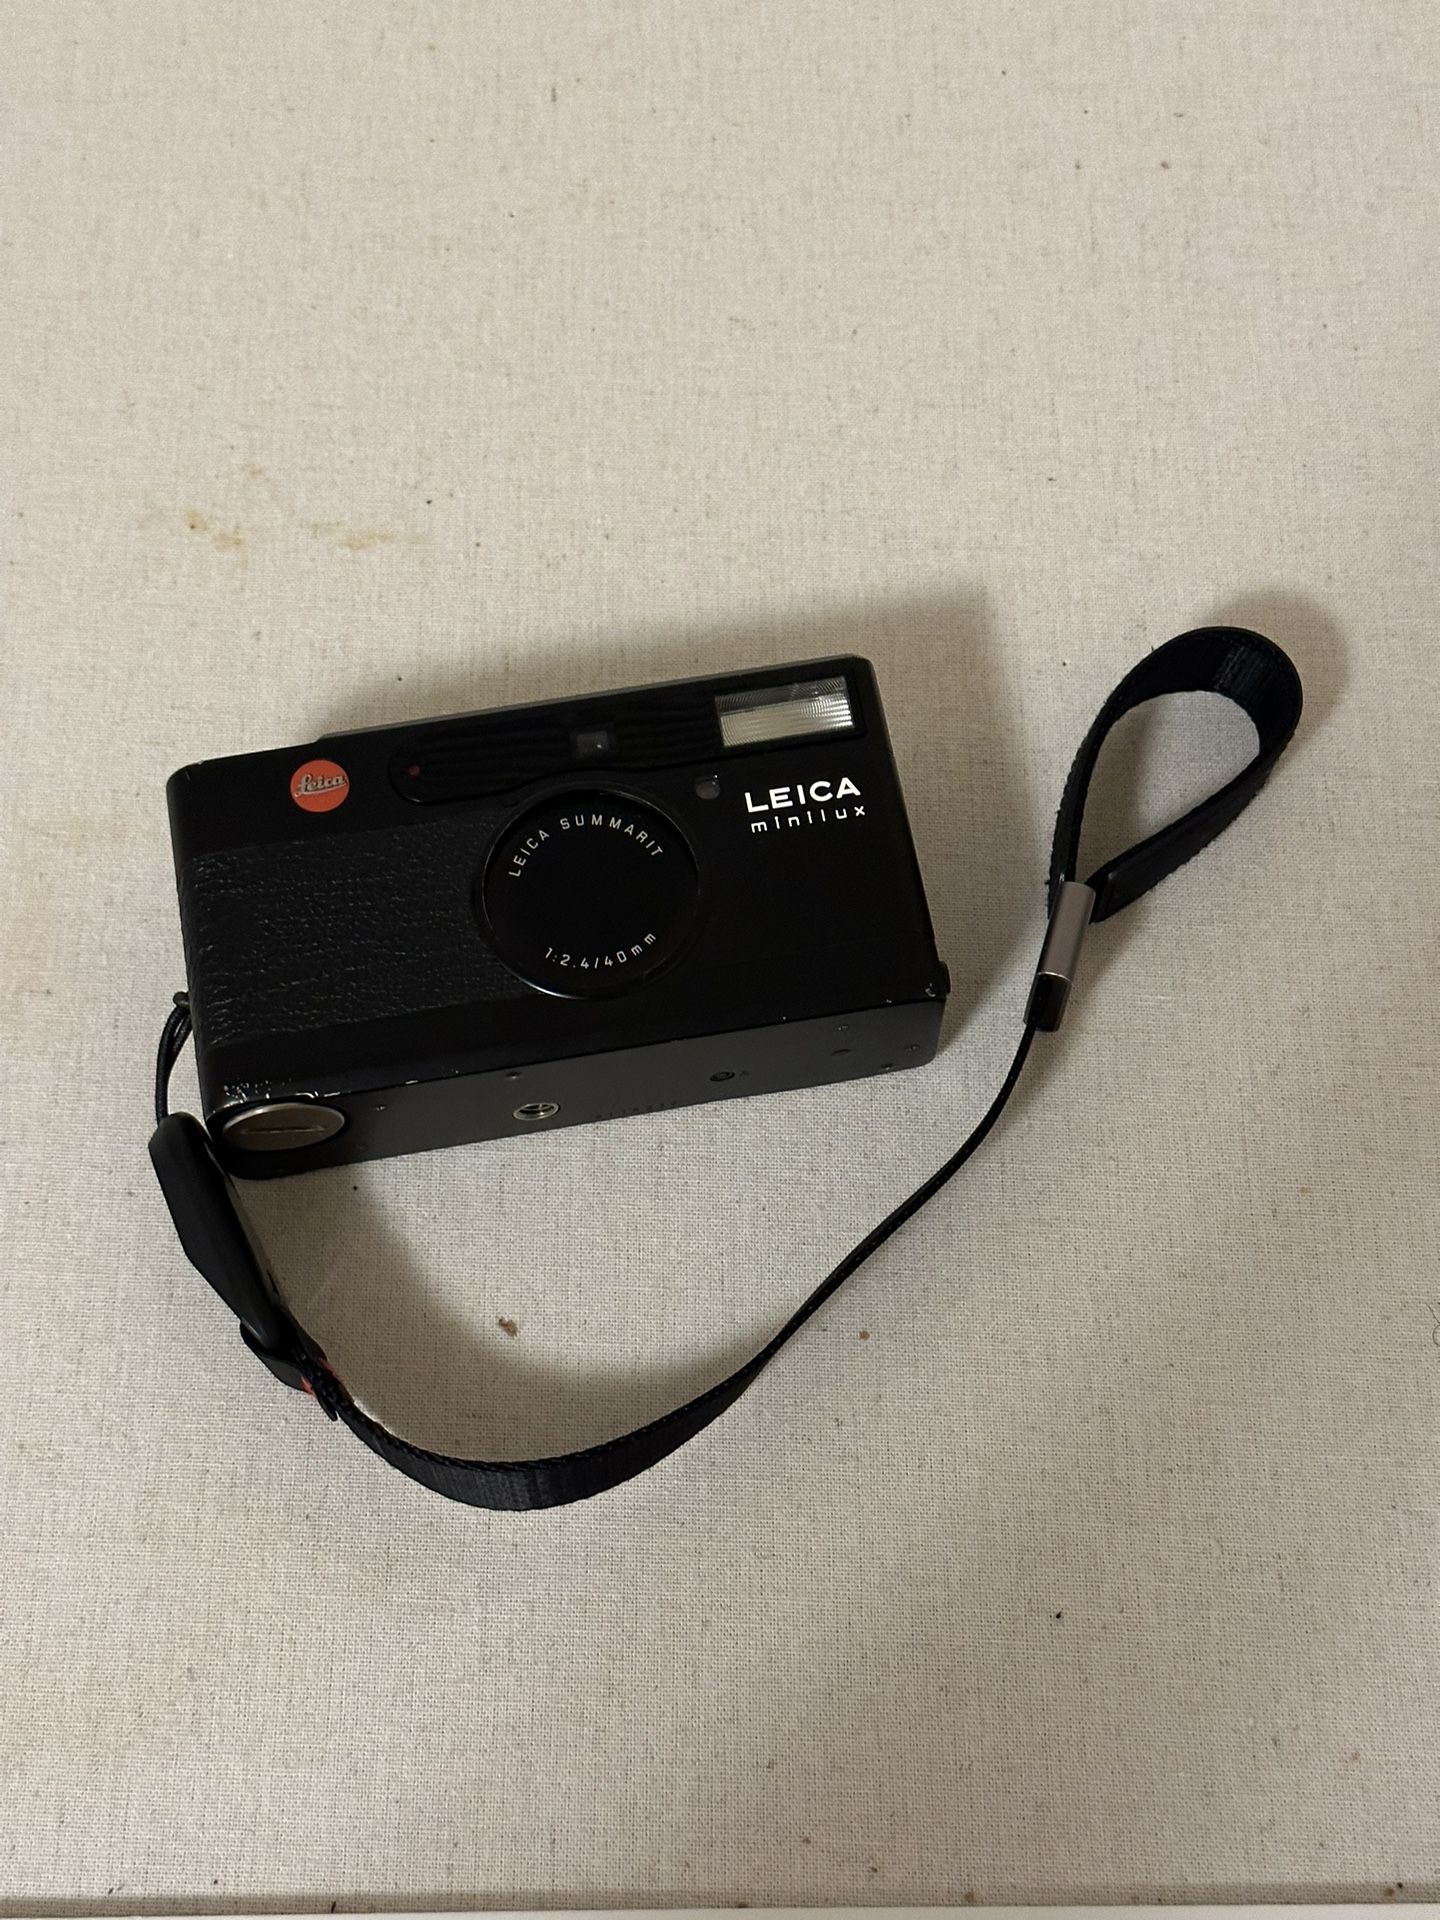 Leica Minilux mm 2.4 for Sale in Seattle, WA   OfferUp